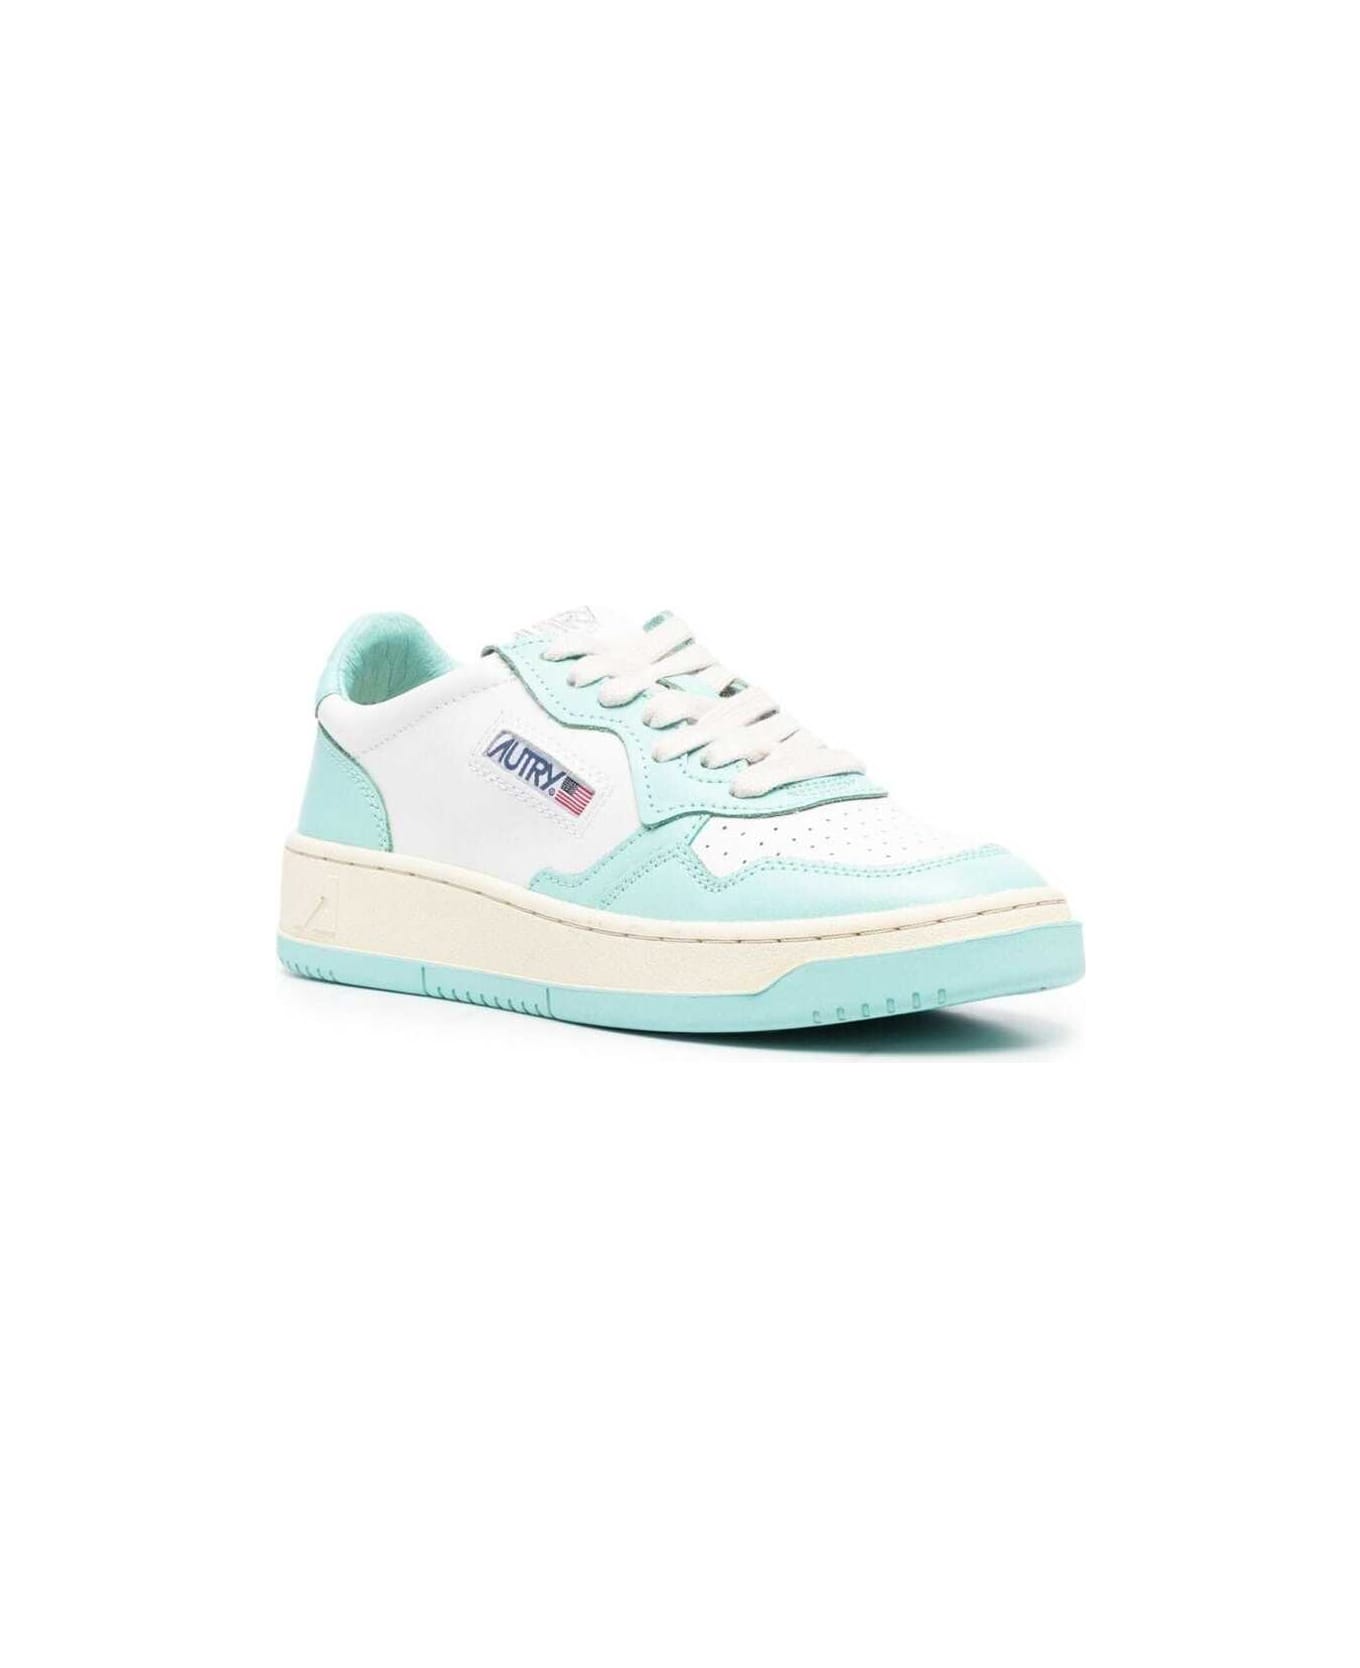 Autry Medalist Lace-up Sneakers - Leat Turquoise